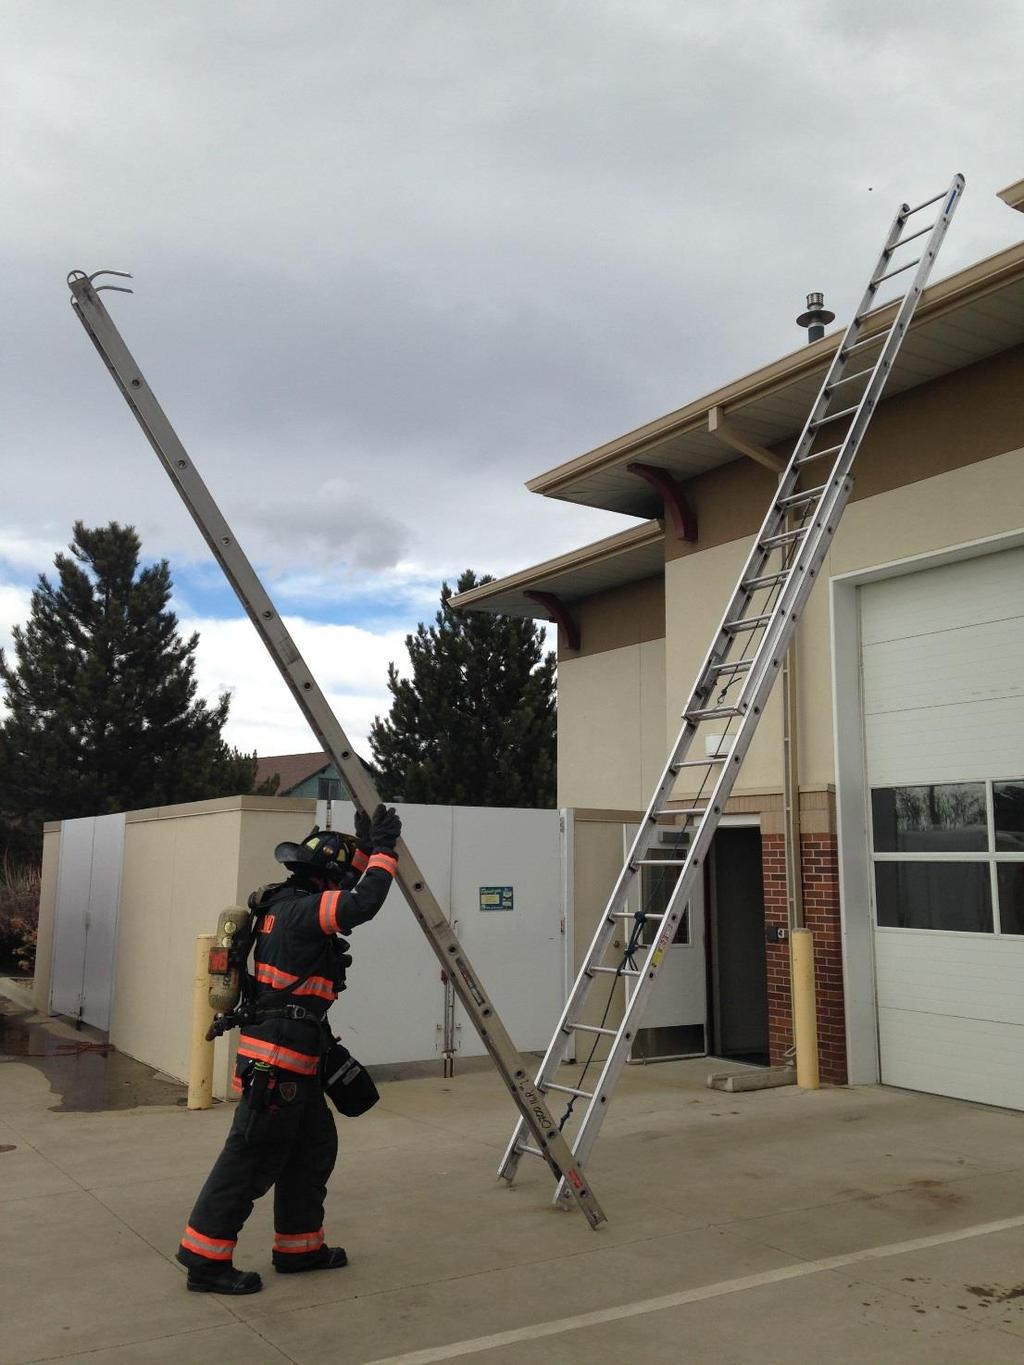 #12 Place the lowest rung of the ladder into the extension ladder already placed on the building using it as a pivot point and